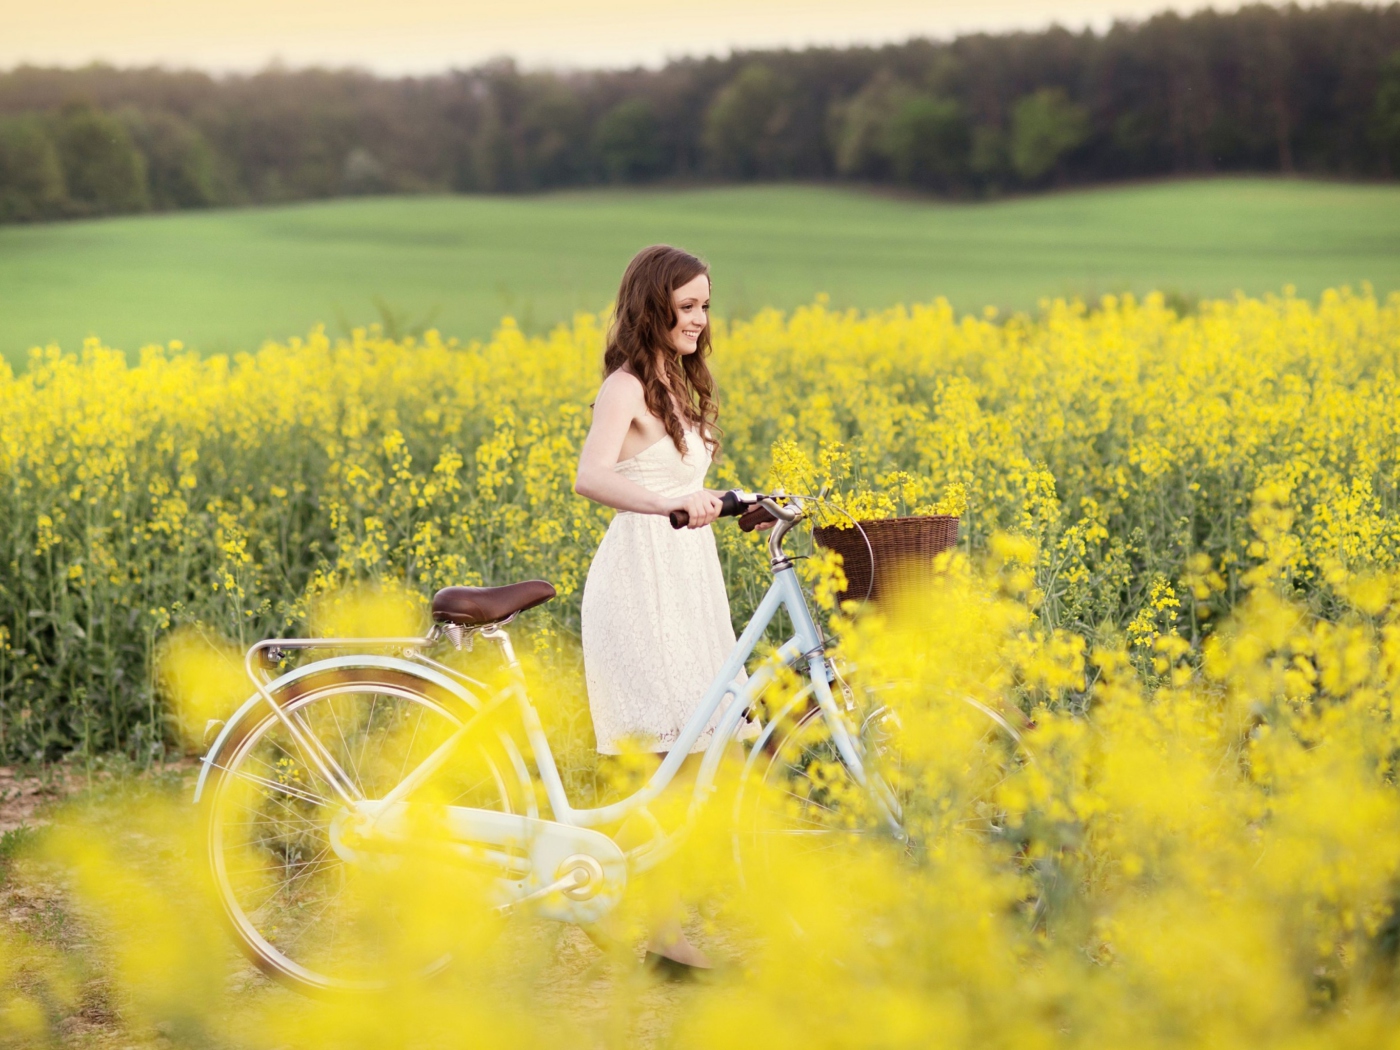 Girl With Bicycle In Yellow Field wallpaper 1400x1050